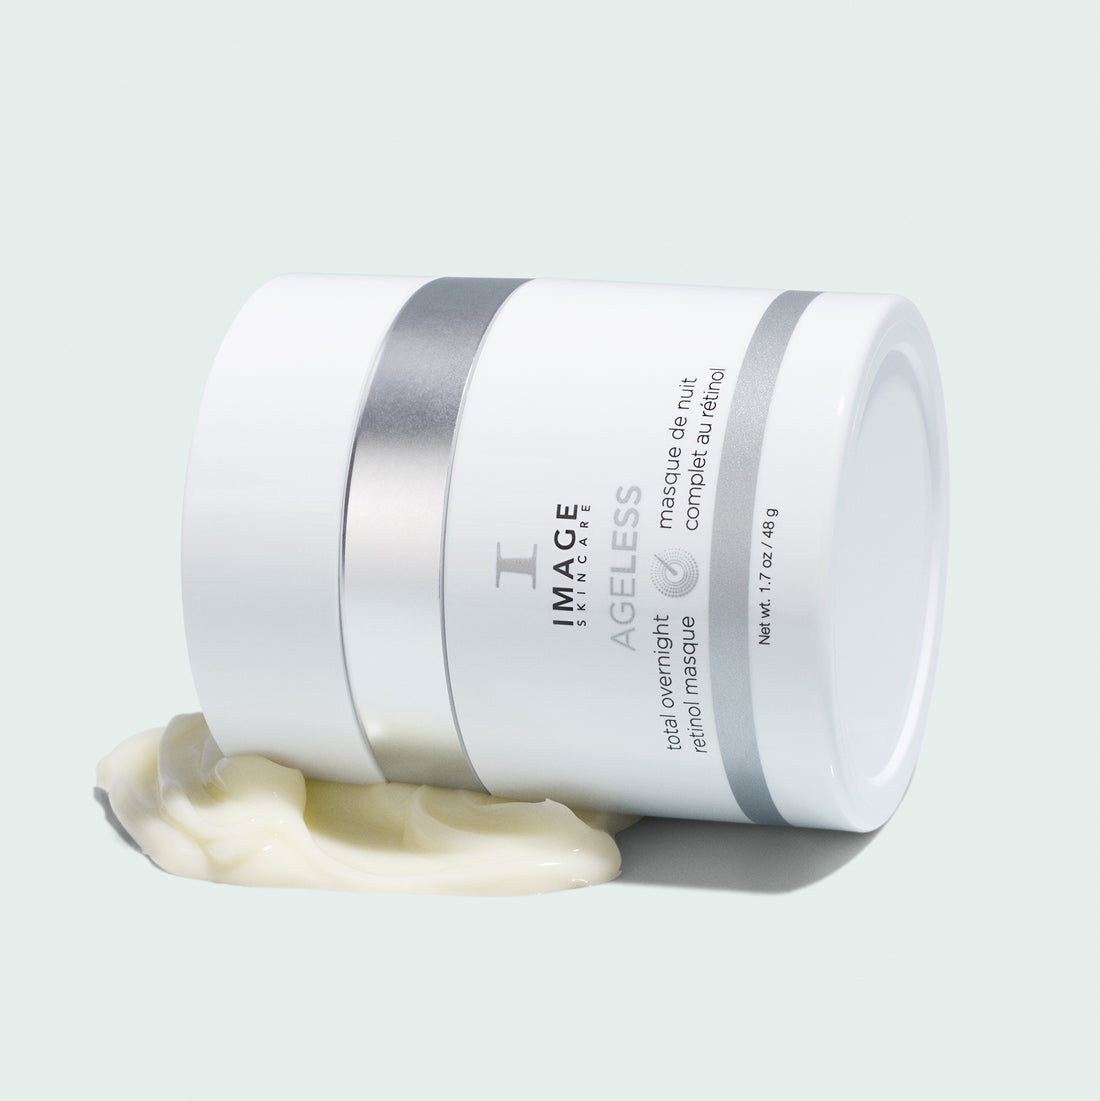 Ageless Total Overnight Mask